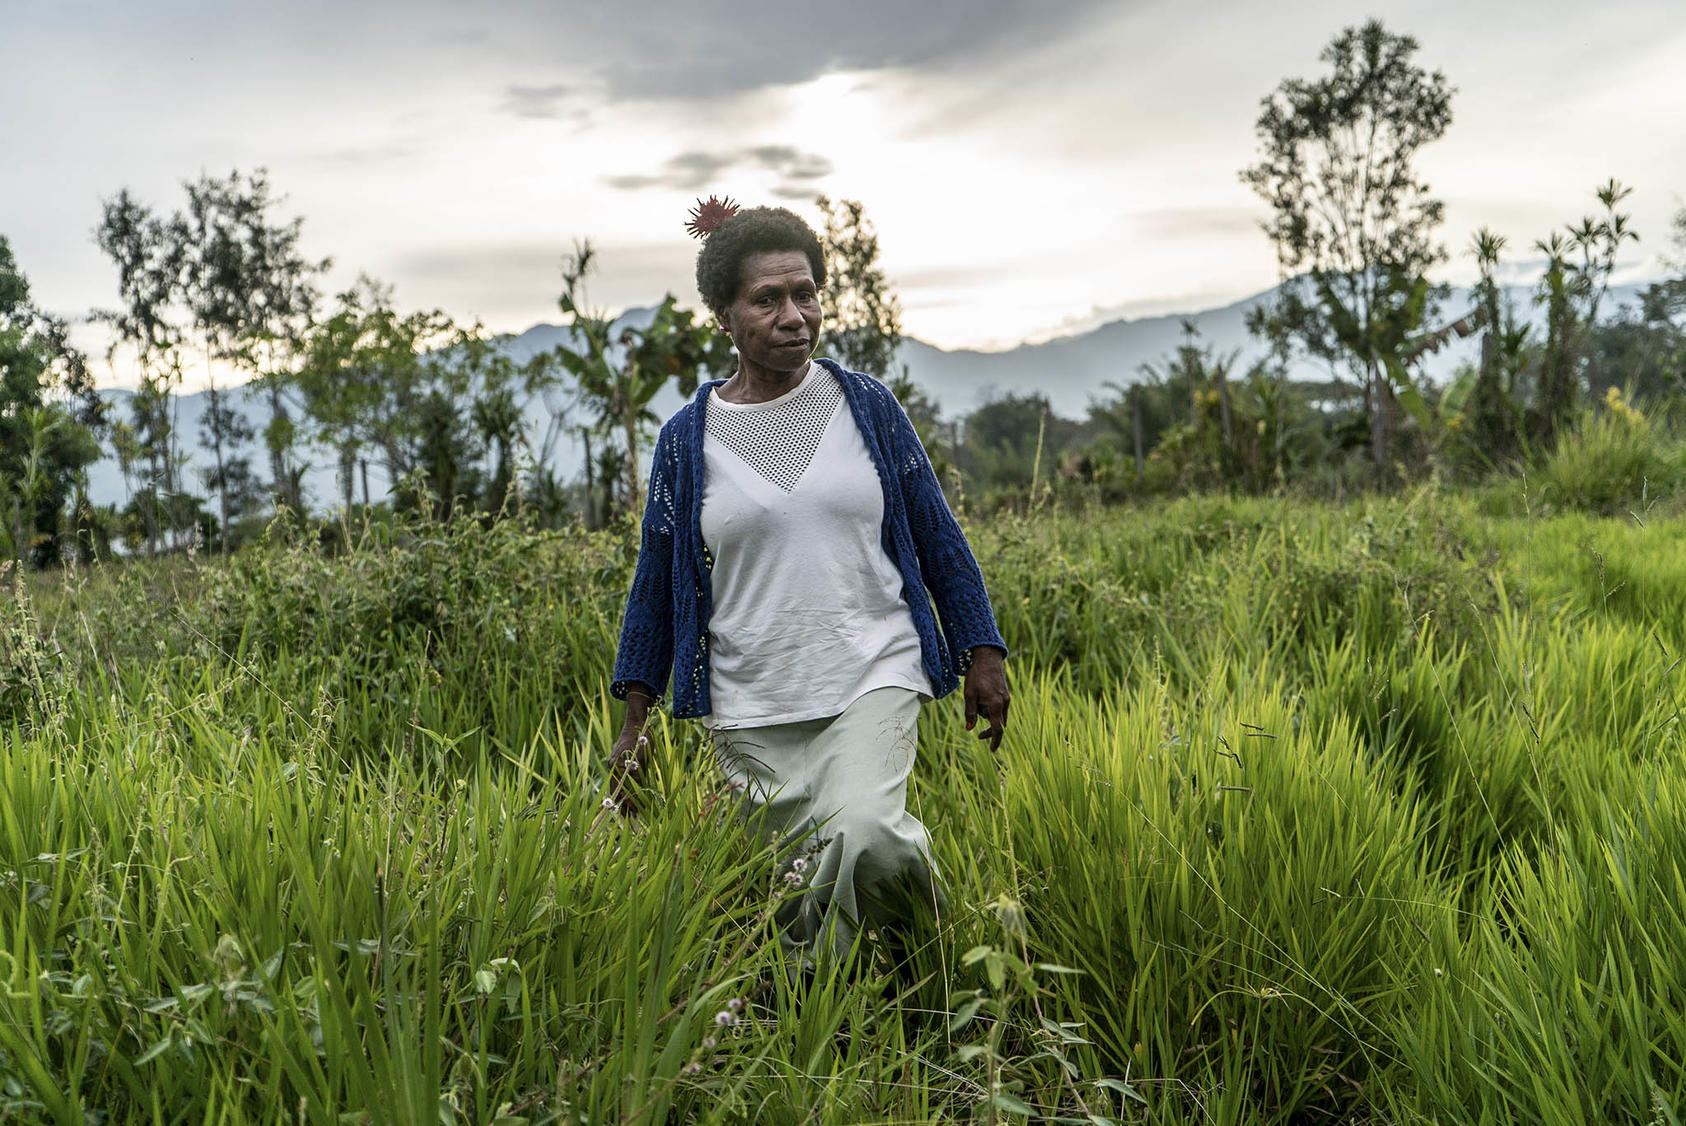 Angela Kaupa, who runs a women's shelter in Goroka, PNG, Oct. 25, 2018. In PNG — one of the least safe countries in the world for women — boosting gender equality will be key to efforts to address fragility. (Ben C. Solomon/The New York Times)